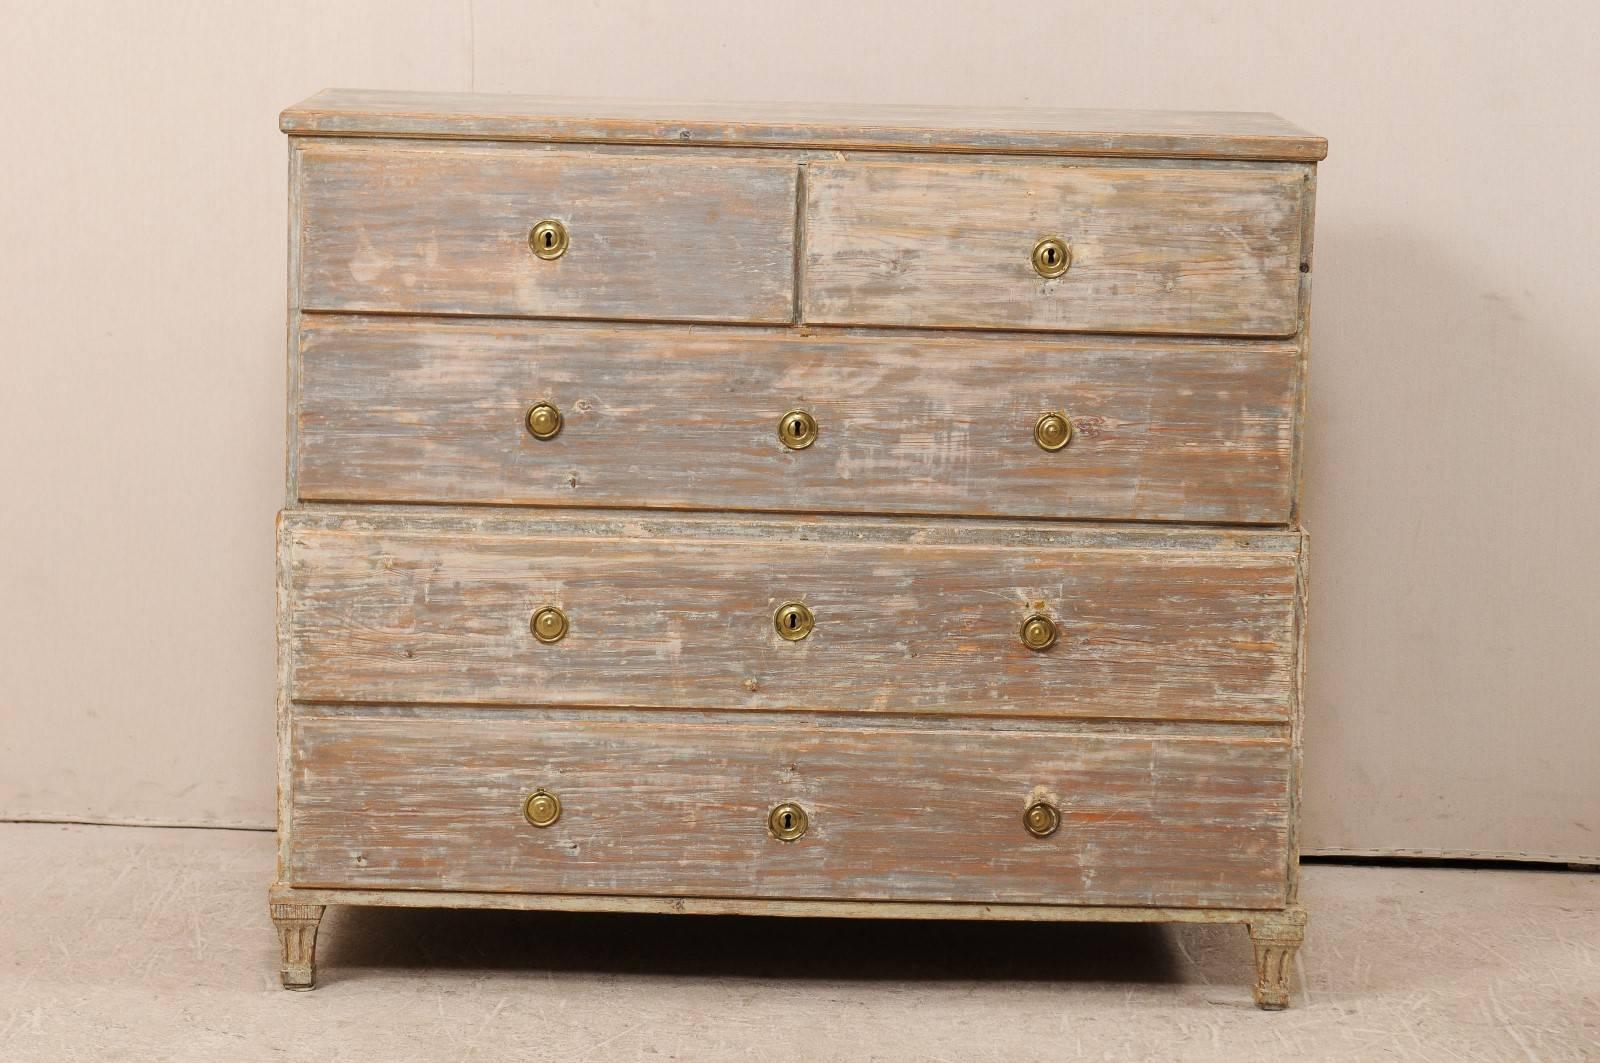 A late 18th century Swedish chest of drawers. This Swedish antique chest features two small drawers over three larger drawers. The chest also has a unique feature, being that the top half can easily be separated from the bottom. This makes for ease